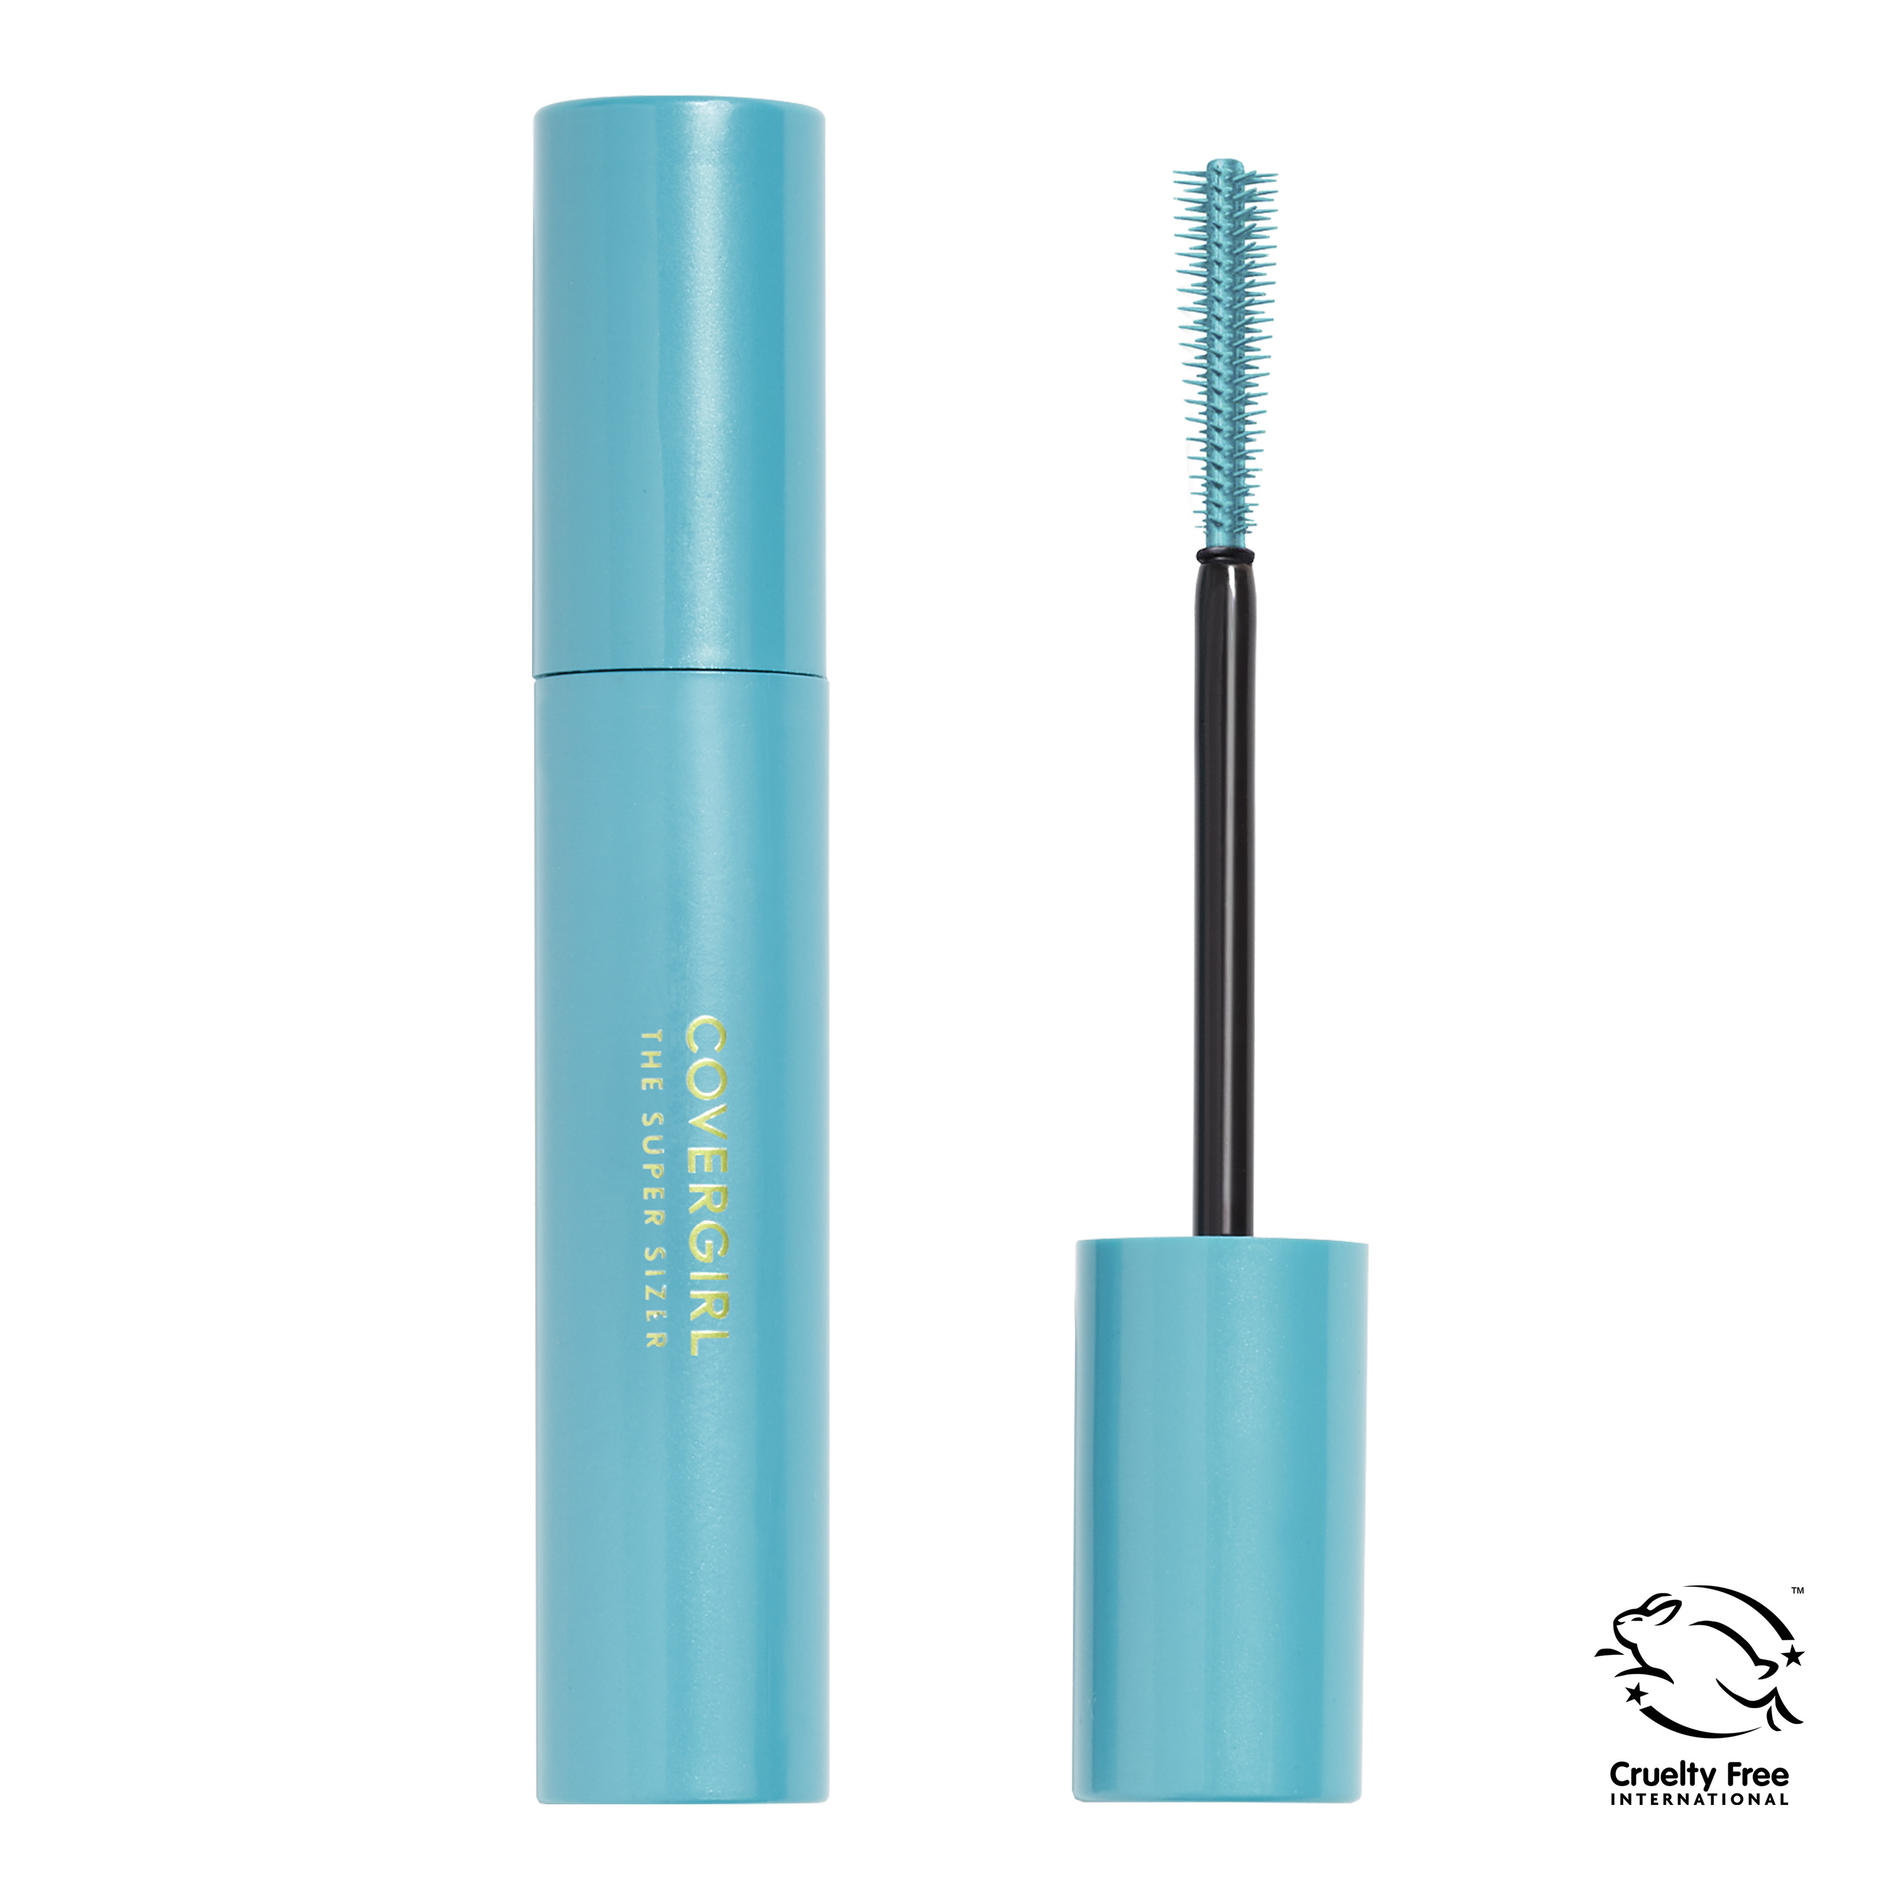 COVERGIRL Super Sizer Mascara, 810 Black Brown, 0.4 oz, Volume and Length Mascara, Fiber Length Formula, Fanned Lashes That Last All Day, Waterproof & Non-Waterproof Formulas - image 1 of 4